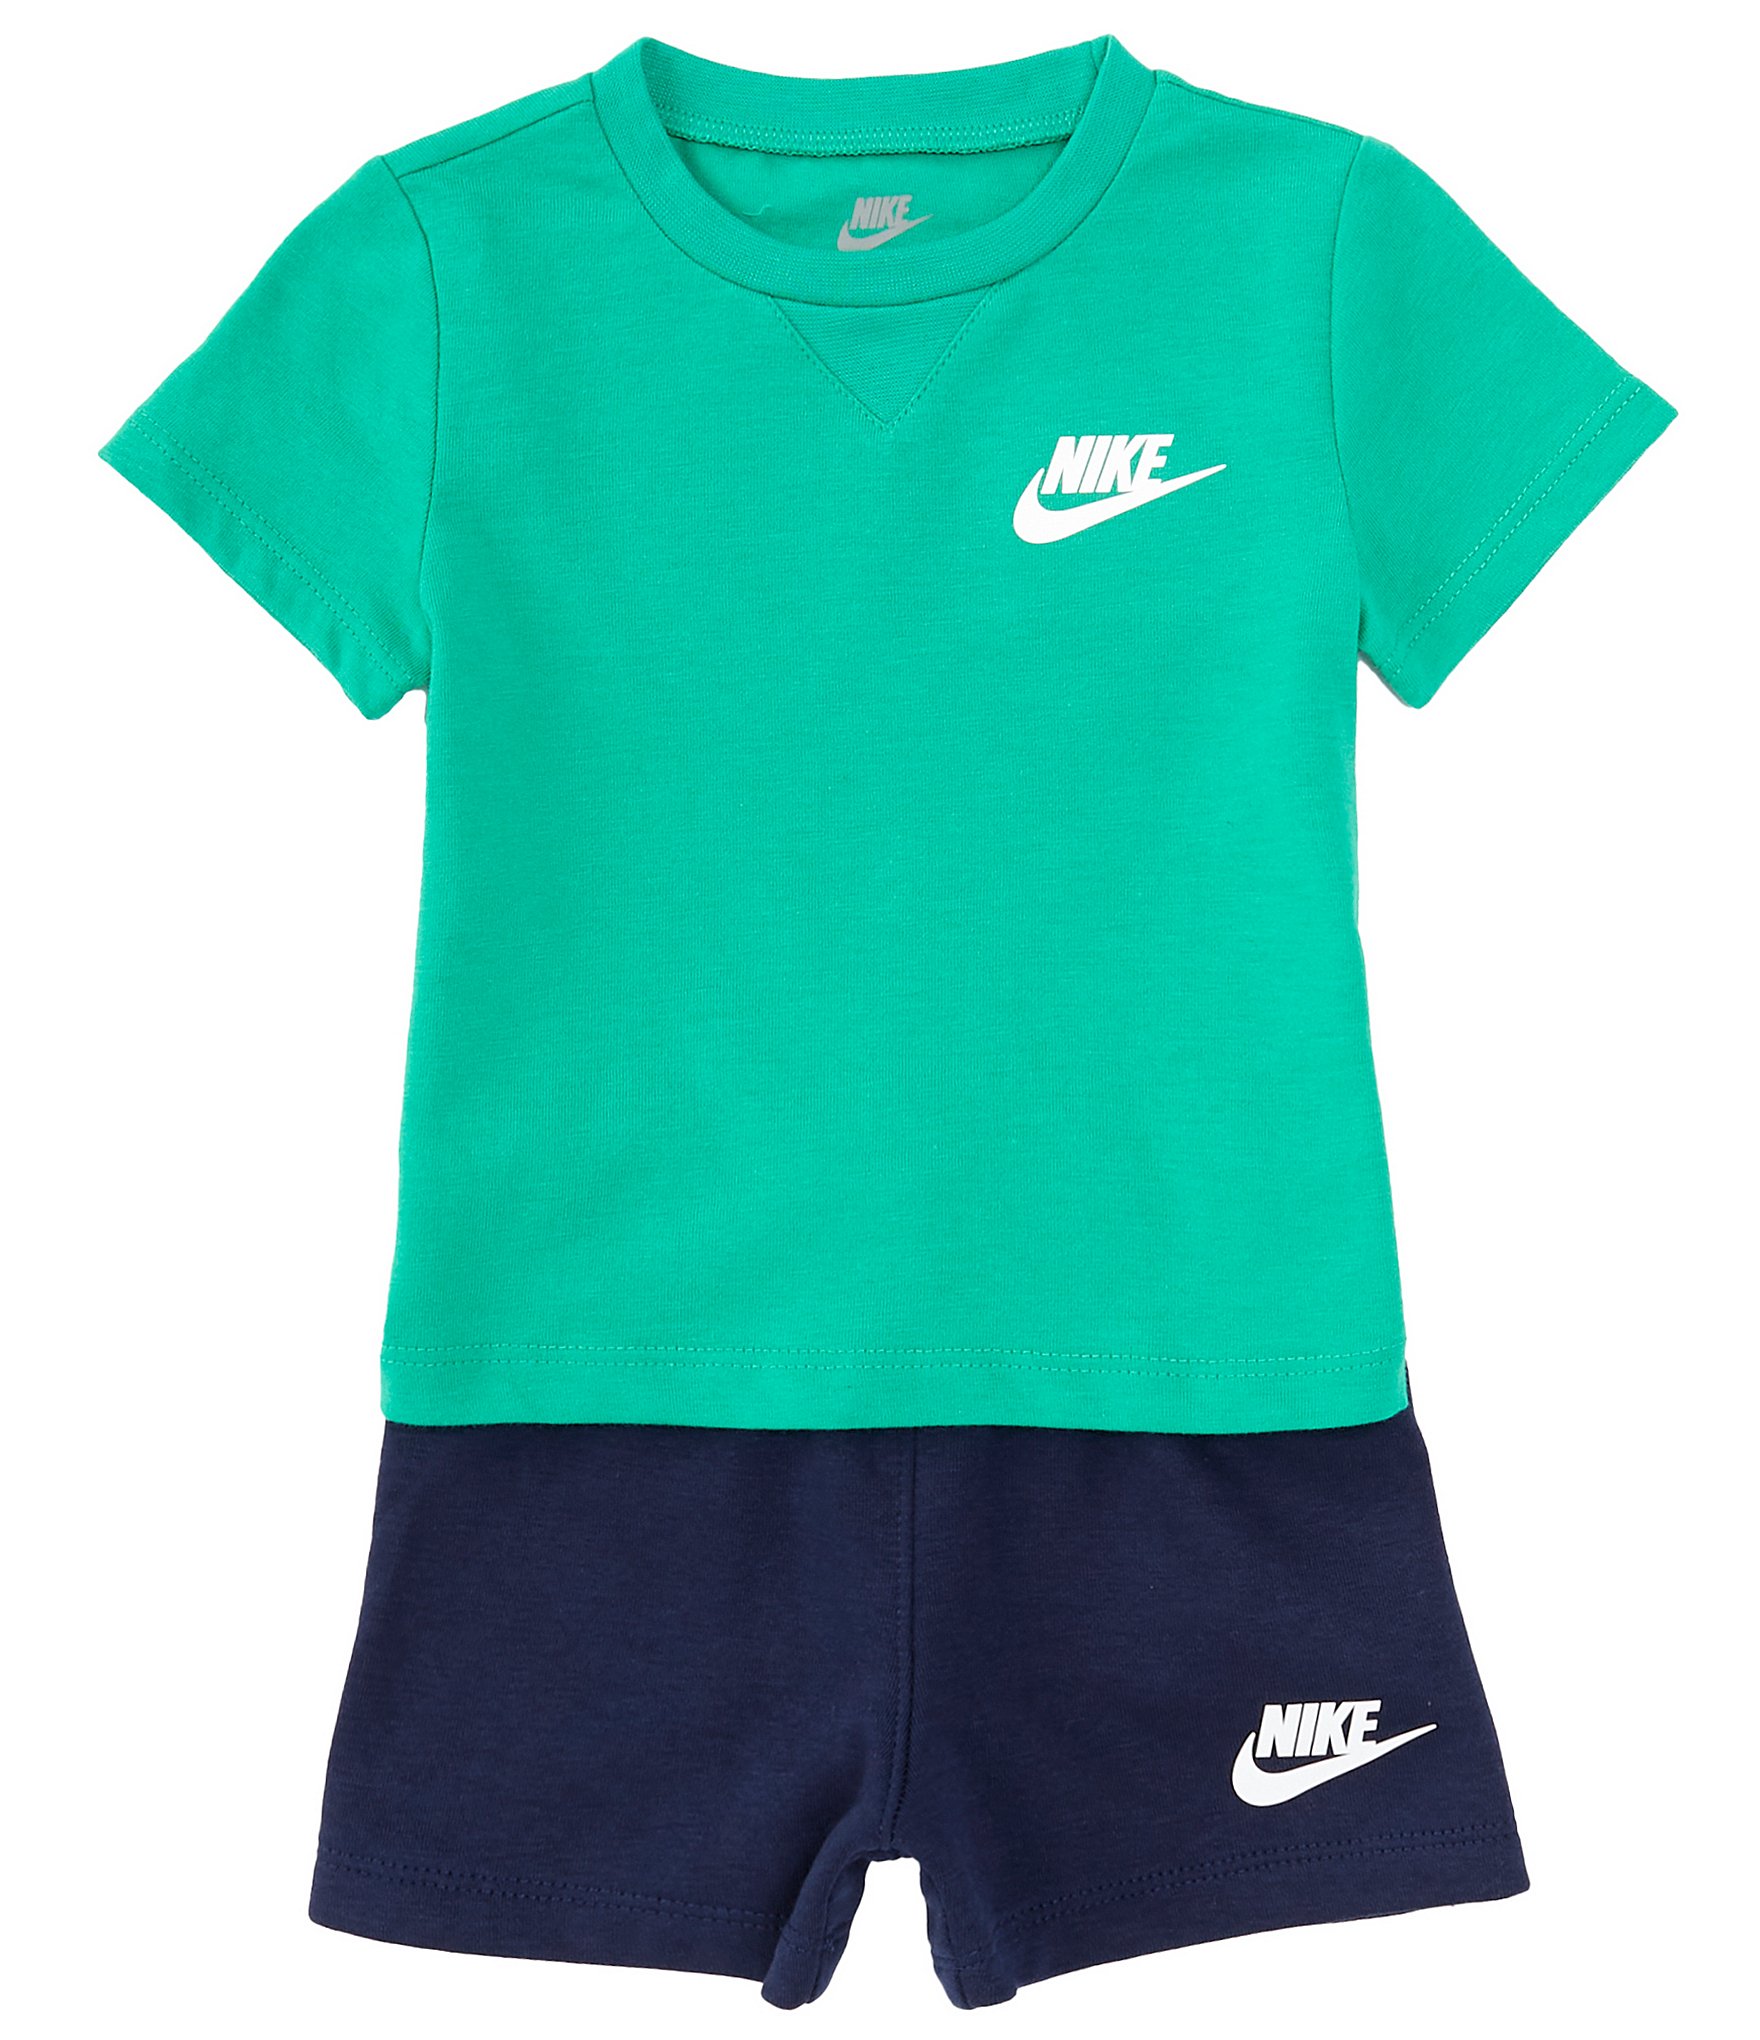 Nike Men's Tshirt and Shorts set Standard Fit size Small